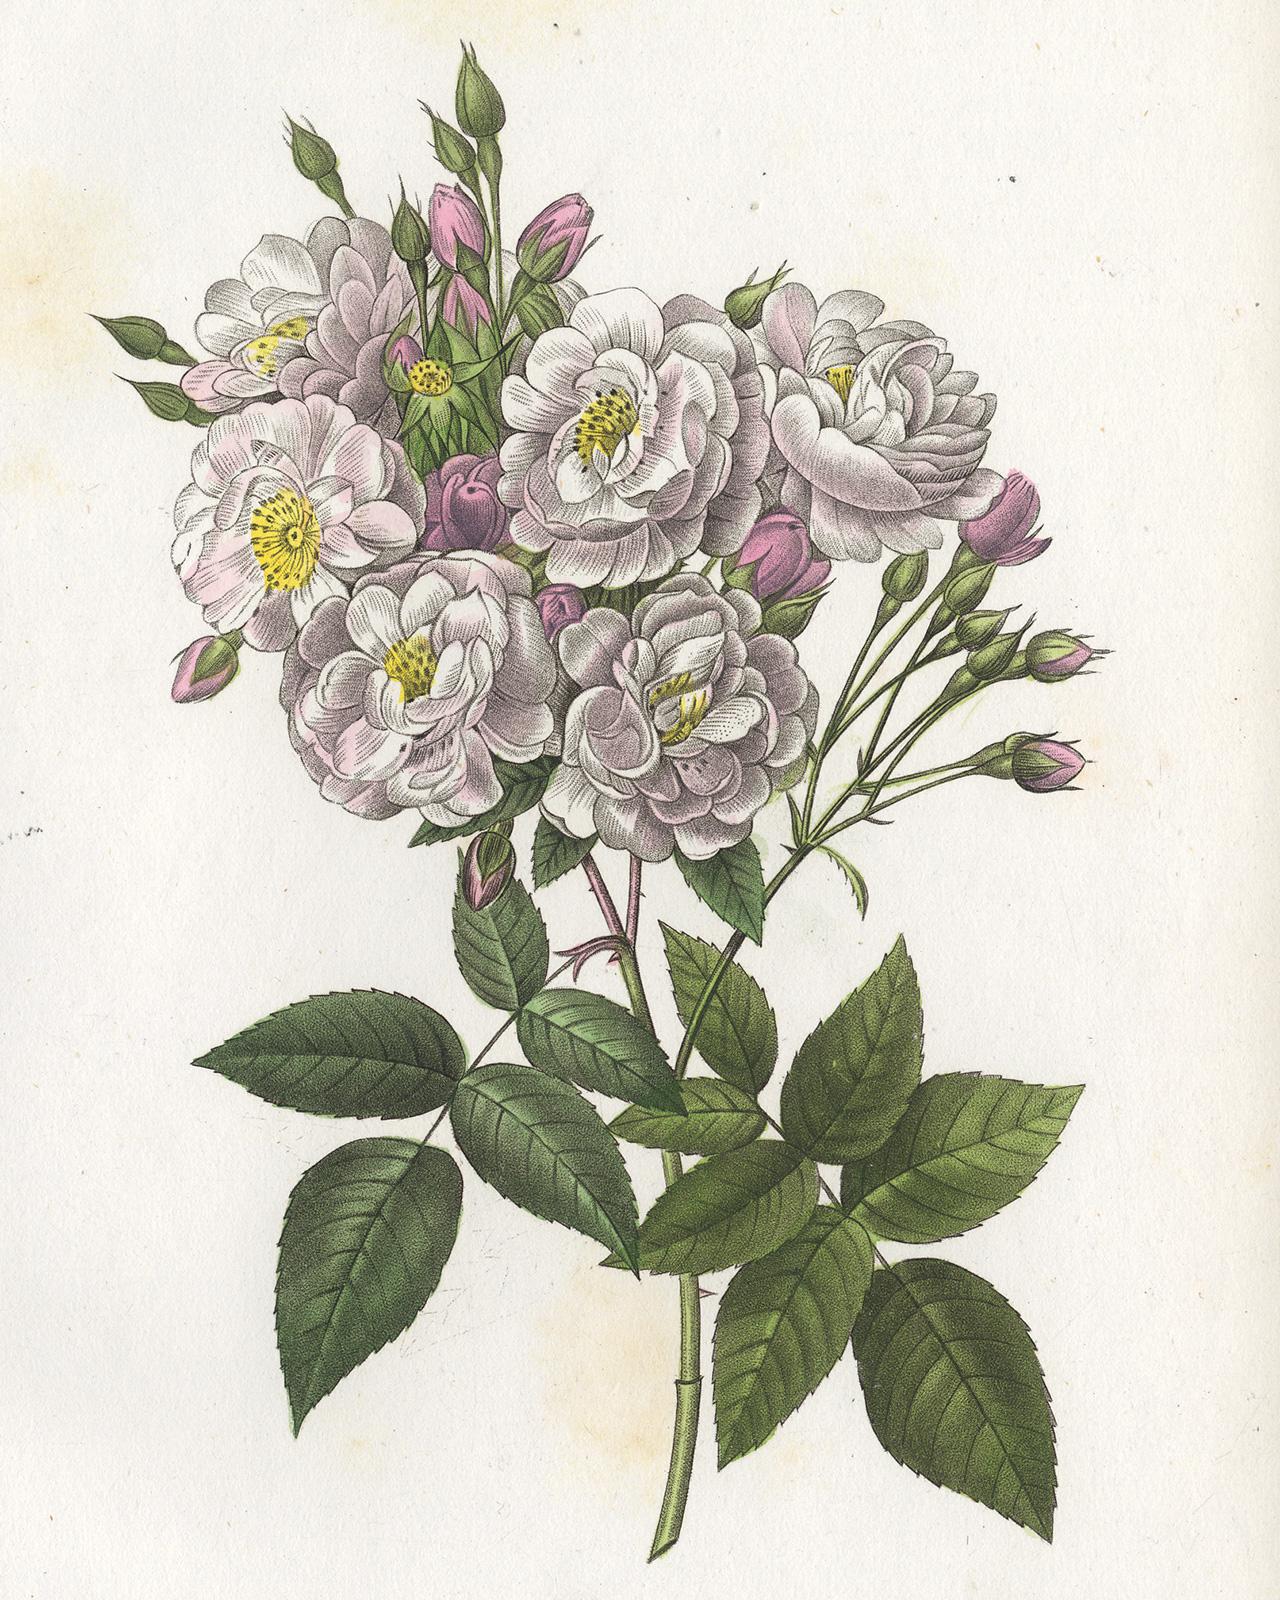 Noisette Rose by Redoute - Les Roses - Handcoloured engraving - 19th century - Print by Pierre-Joseph Redouté